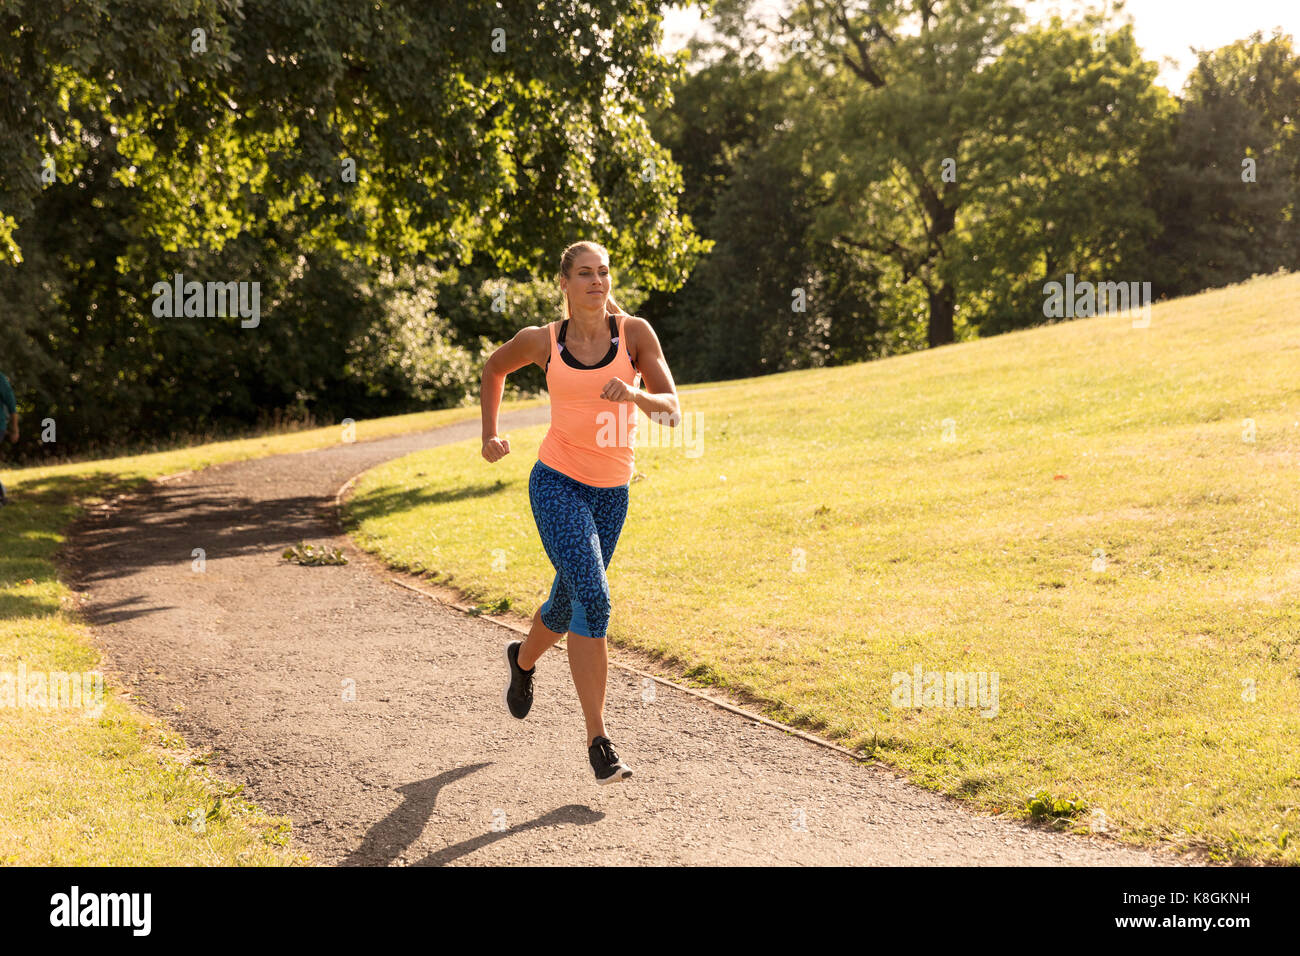 Young female runner running along park path Stock Photo